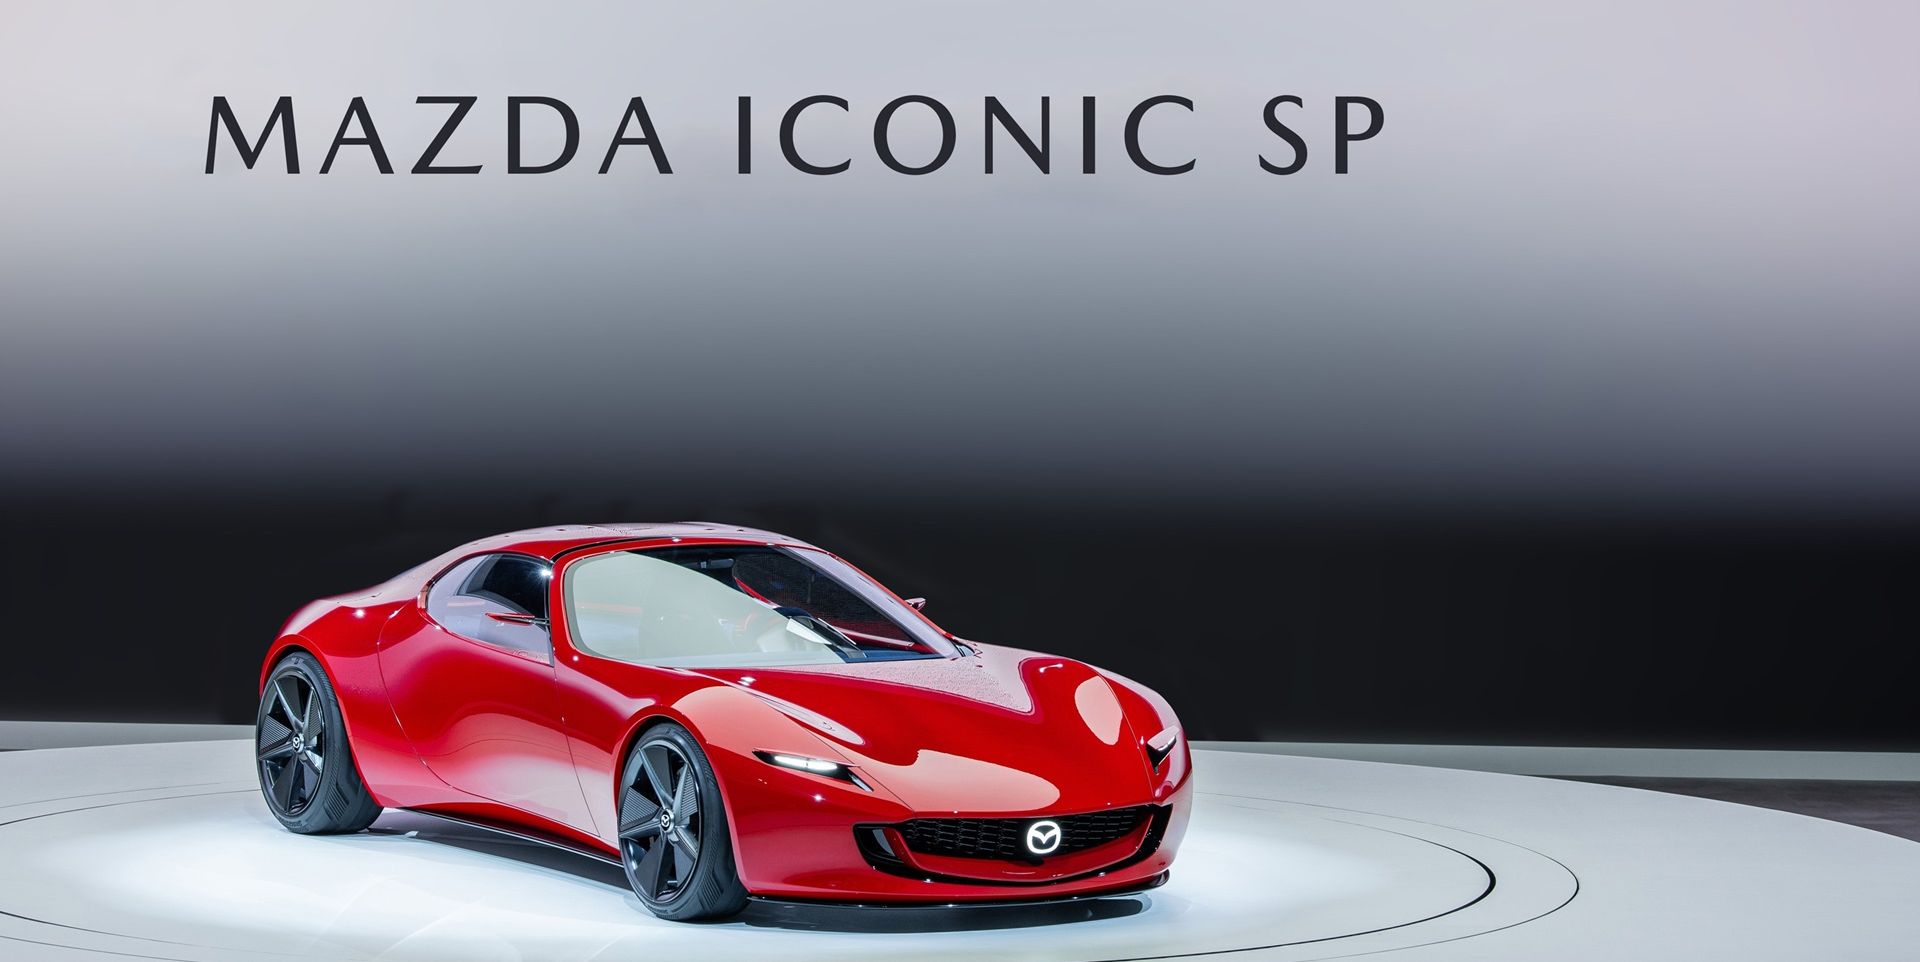 Mazda's Iconic SP Concept Car Packs a Hybrid-Rotary Powertrain